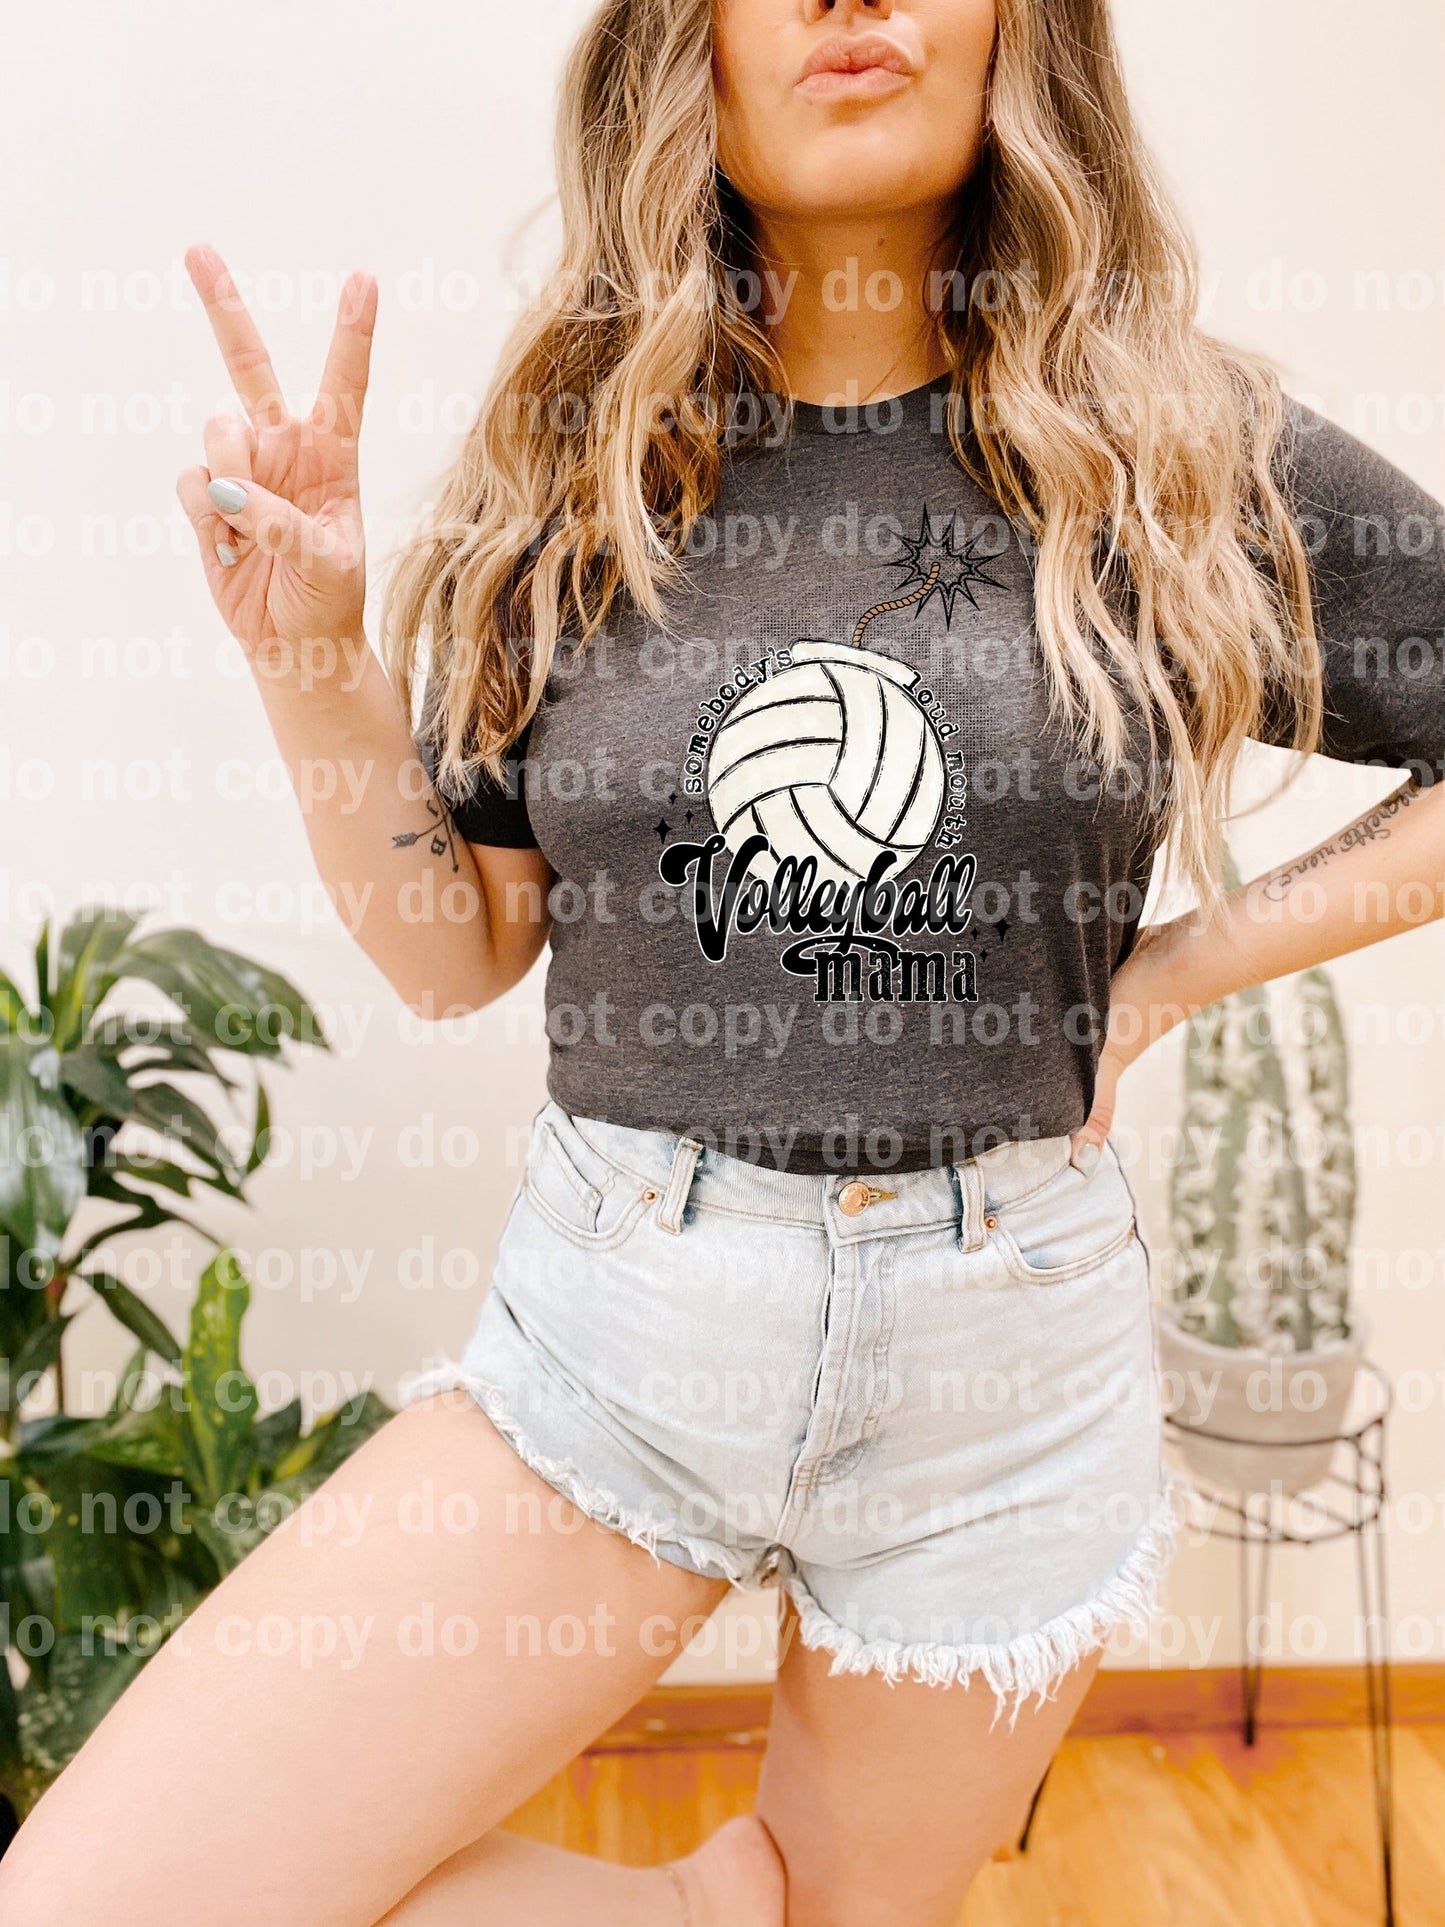 Somebody's Loud Mouth Volleyball Mama Dream Print or Sublimation Print